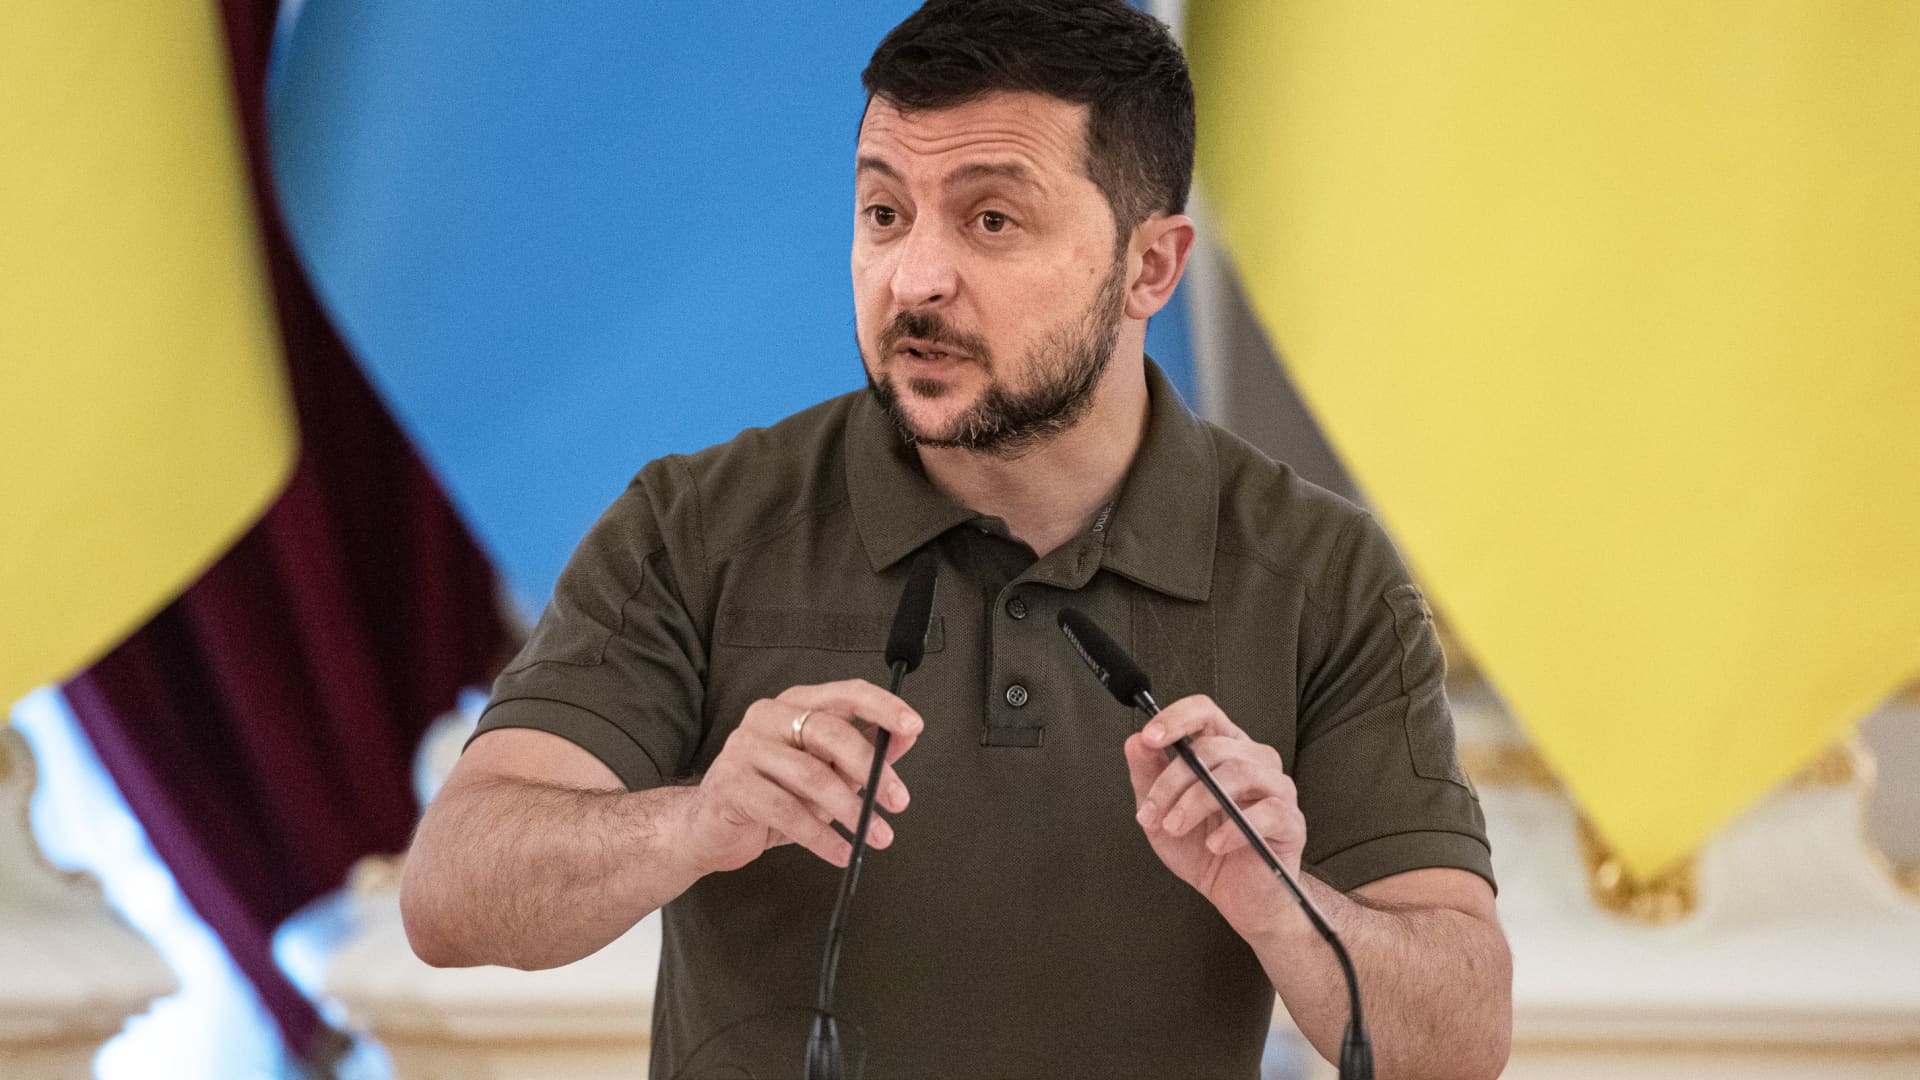 Ukraine wants big banks to be prosecuted for ‘war crimes,’ Zelenskyy’s top economic aide says